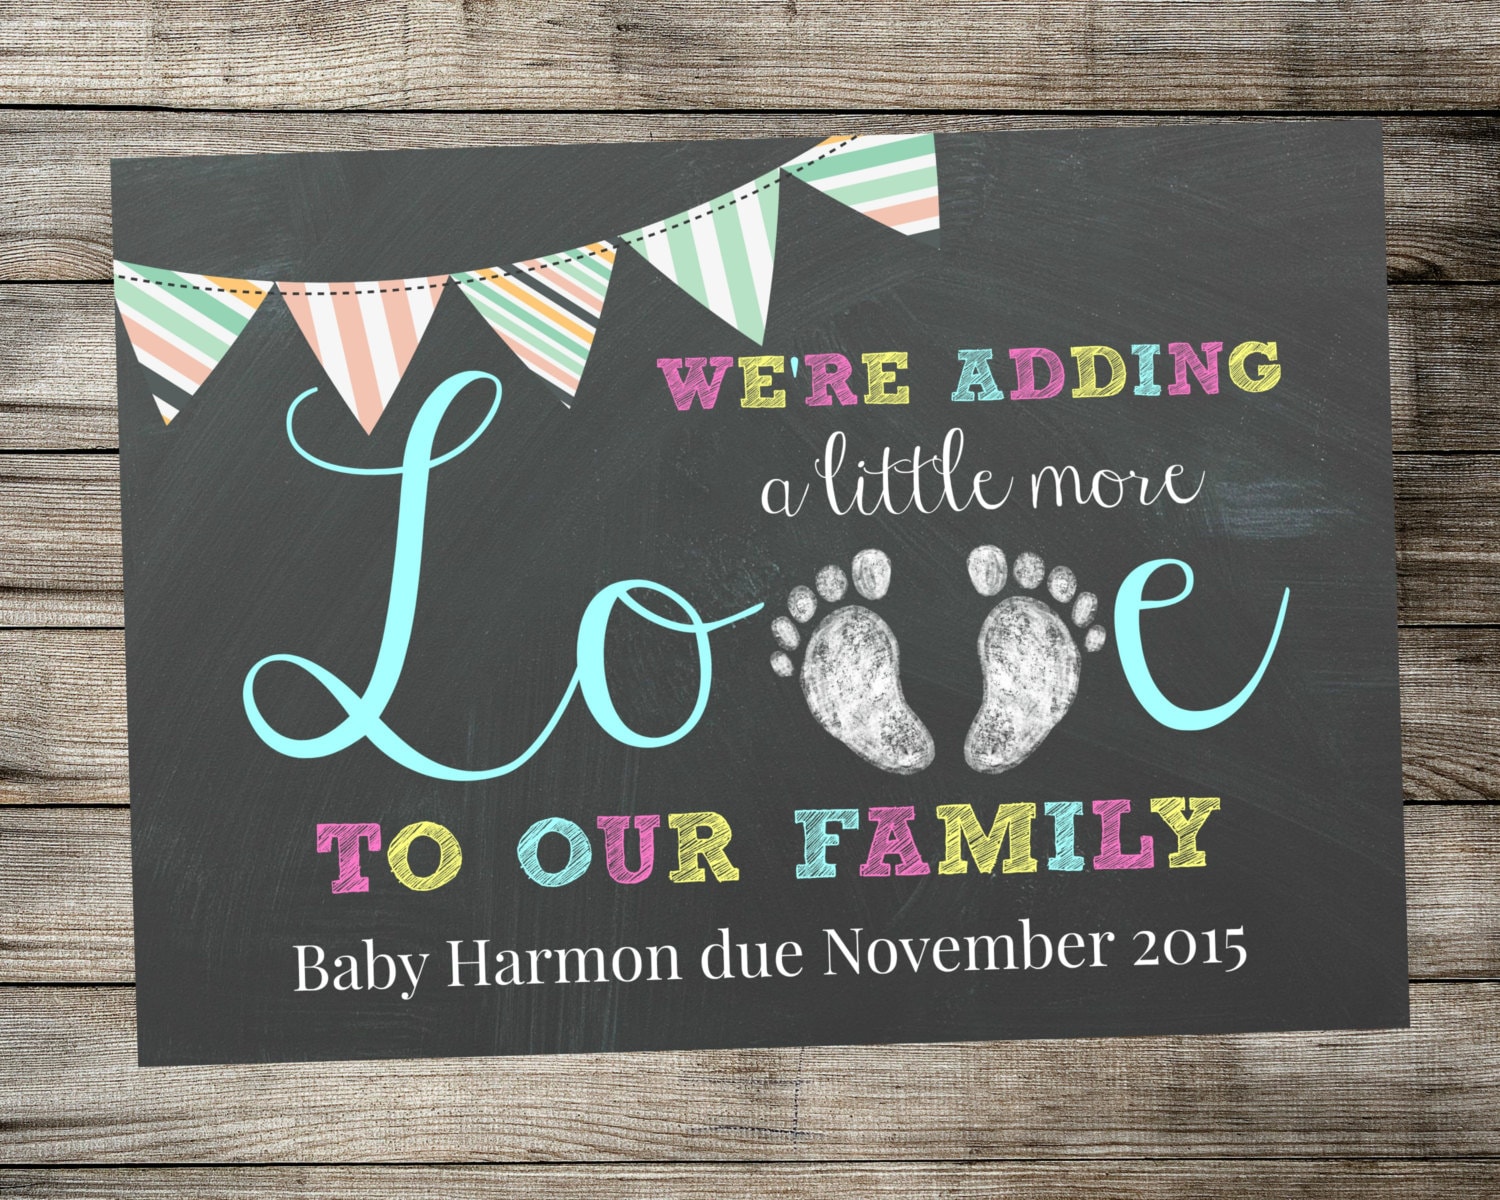 printable-pregnancy-announcement-adding-little-more-love-to